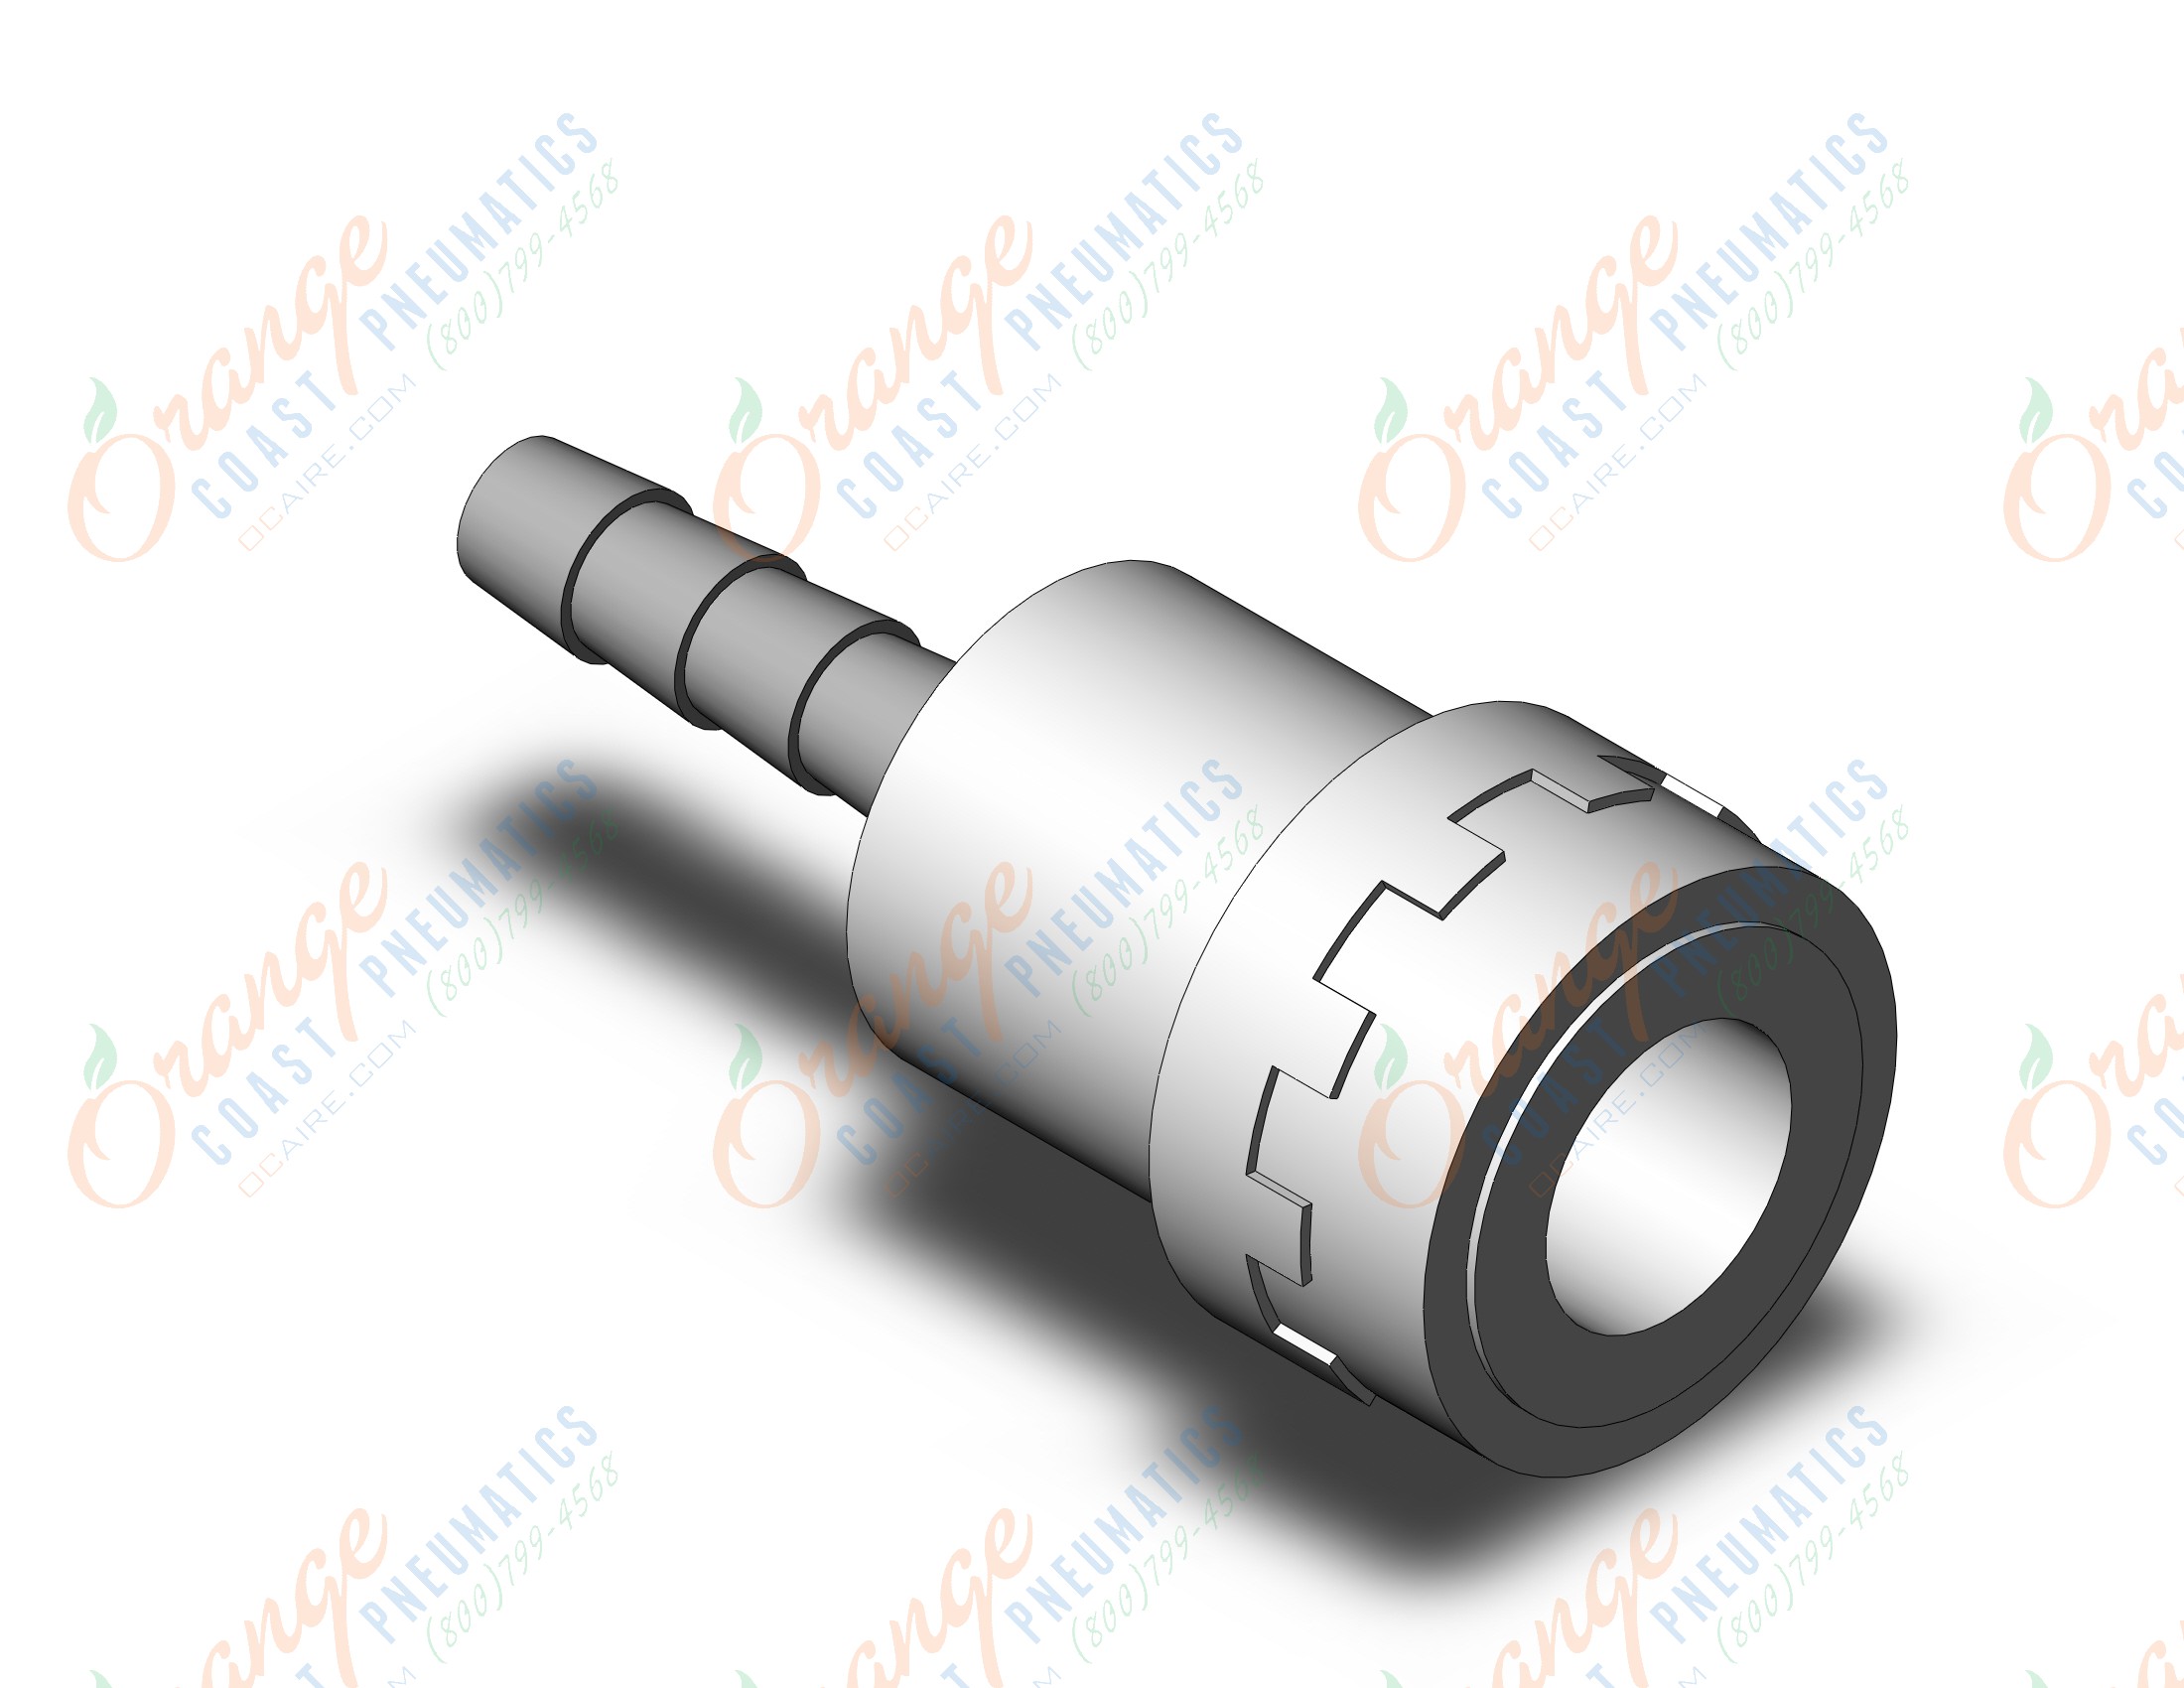 SMC KK130S-07B s coupler, w/barb fitting, KK13 S COUPLERS (sold in packages of 5; price is per piece)